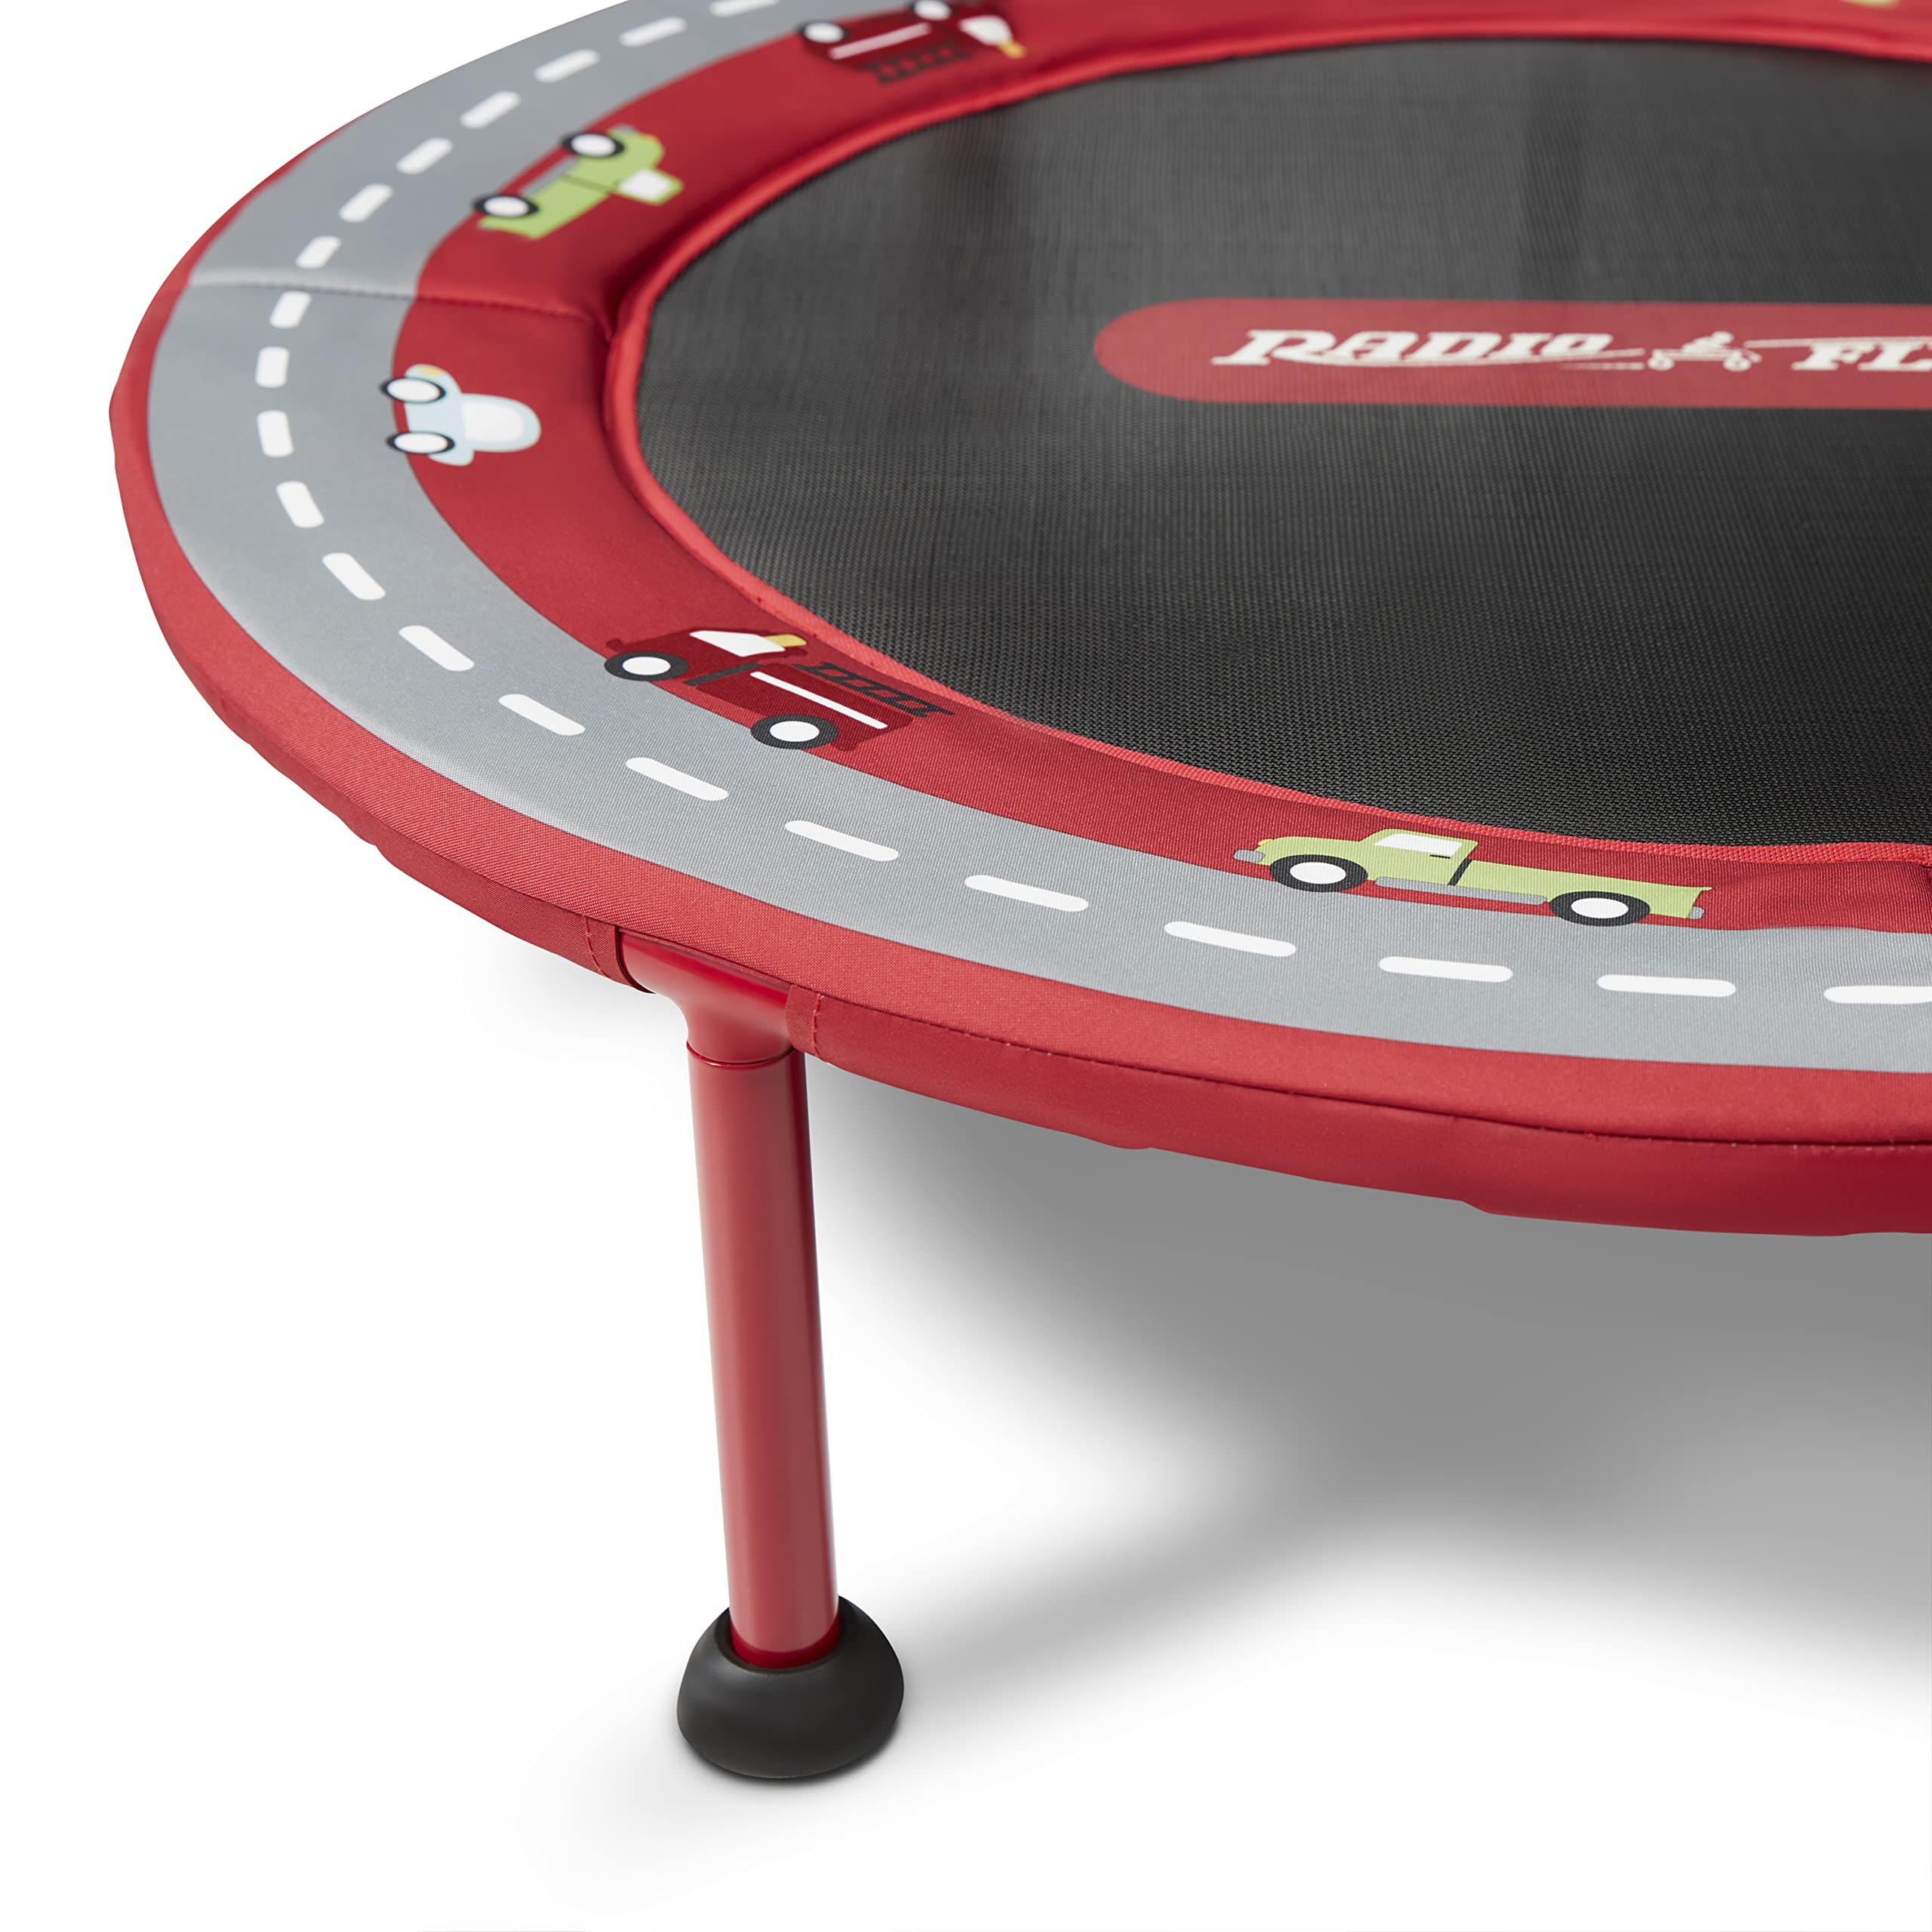 Radio Flyer 2-in-1 Kids' Trampoline, Mini Trampoline for Toddlers, Ages 3-6 Years